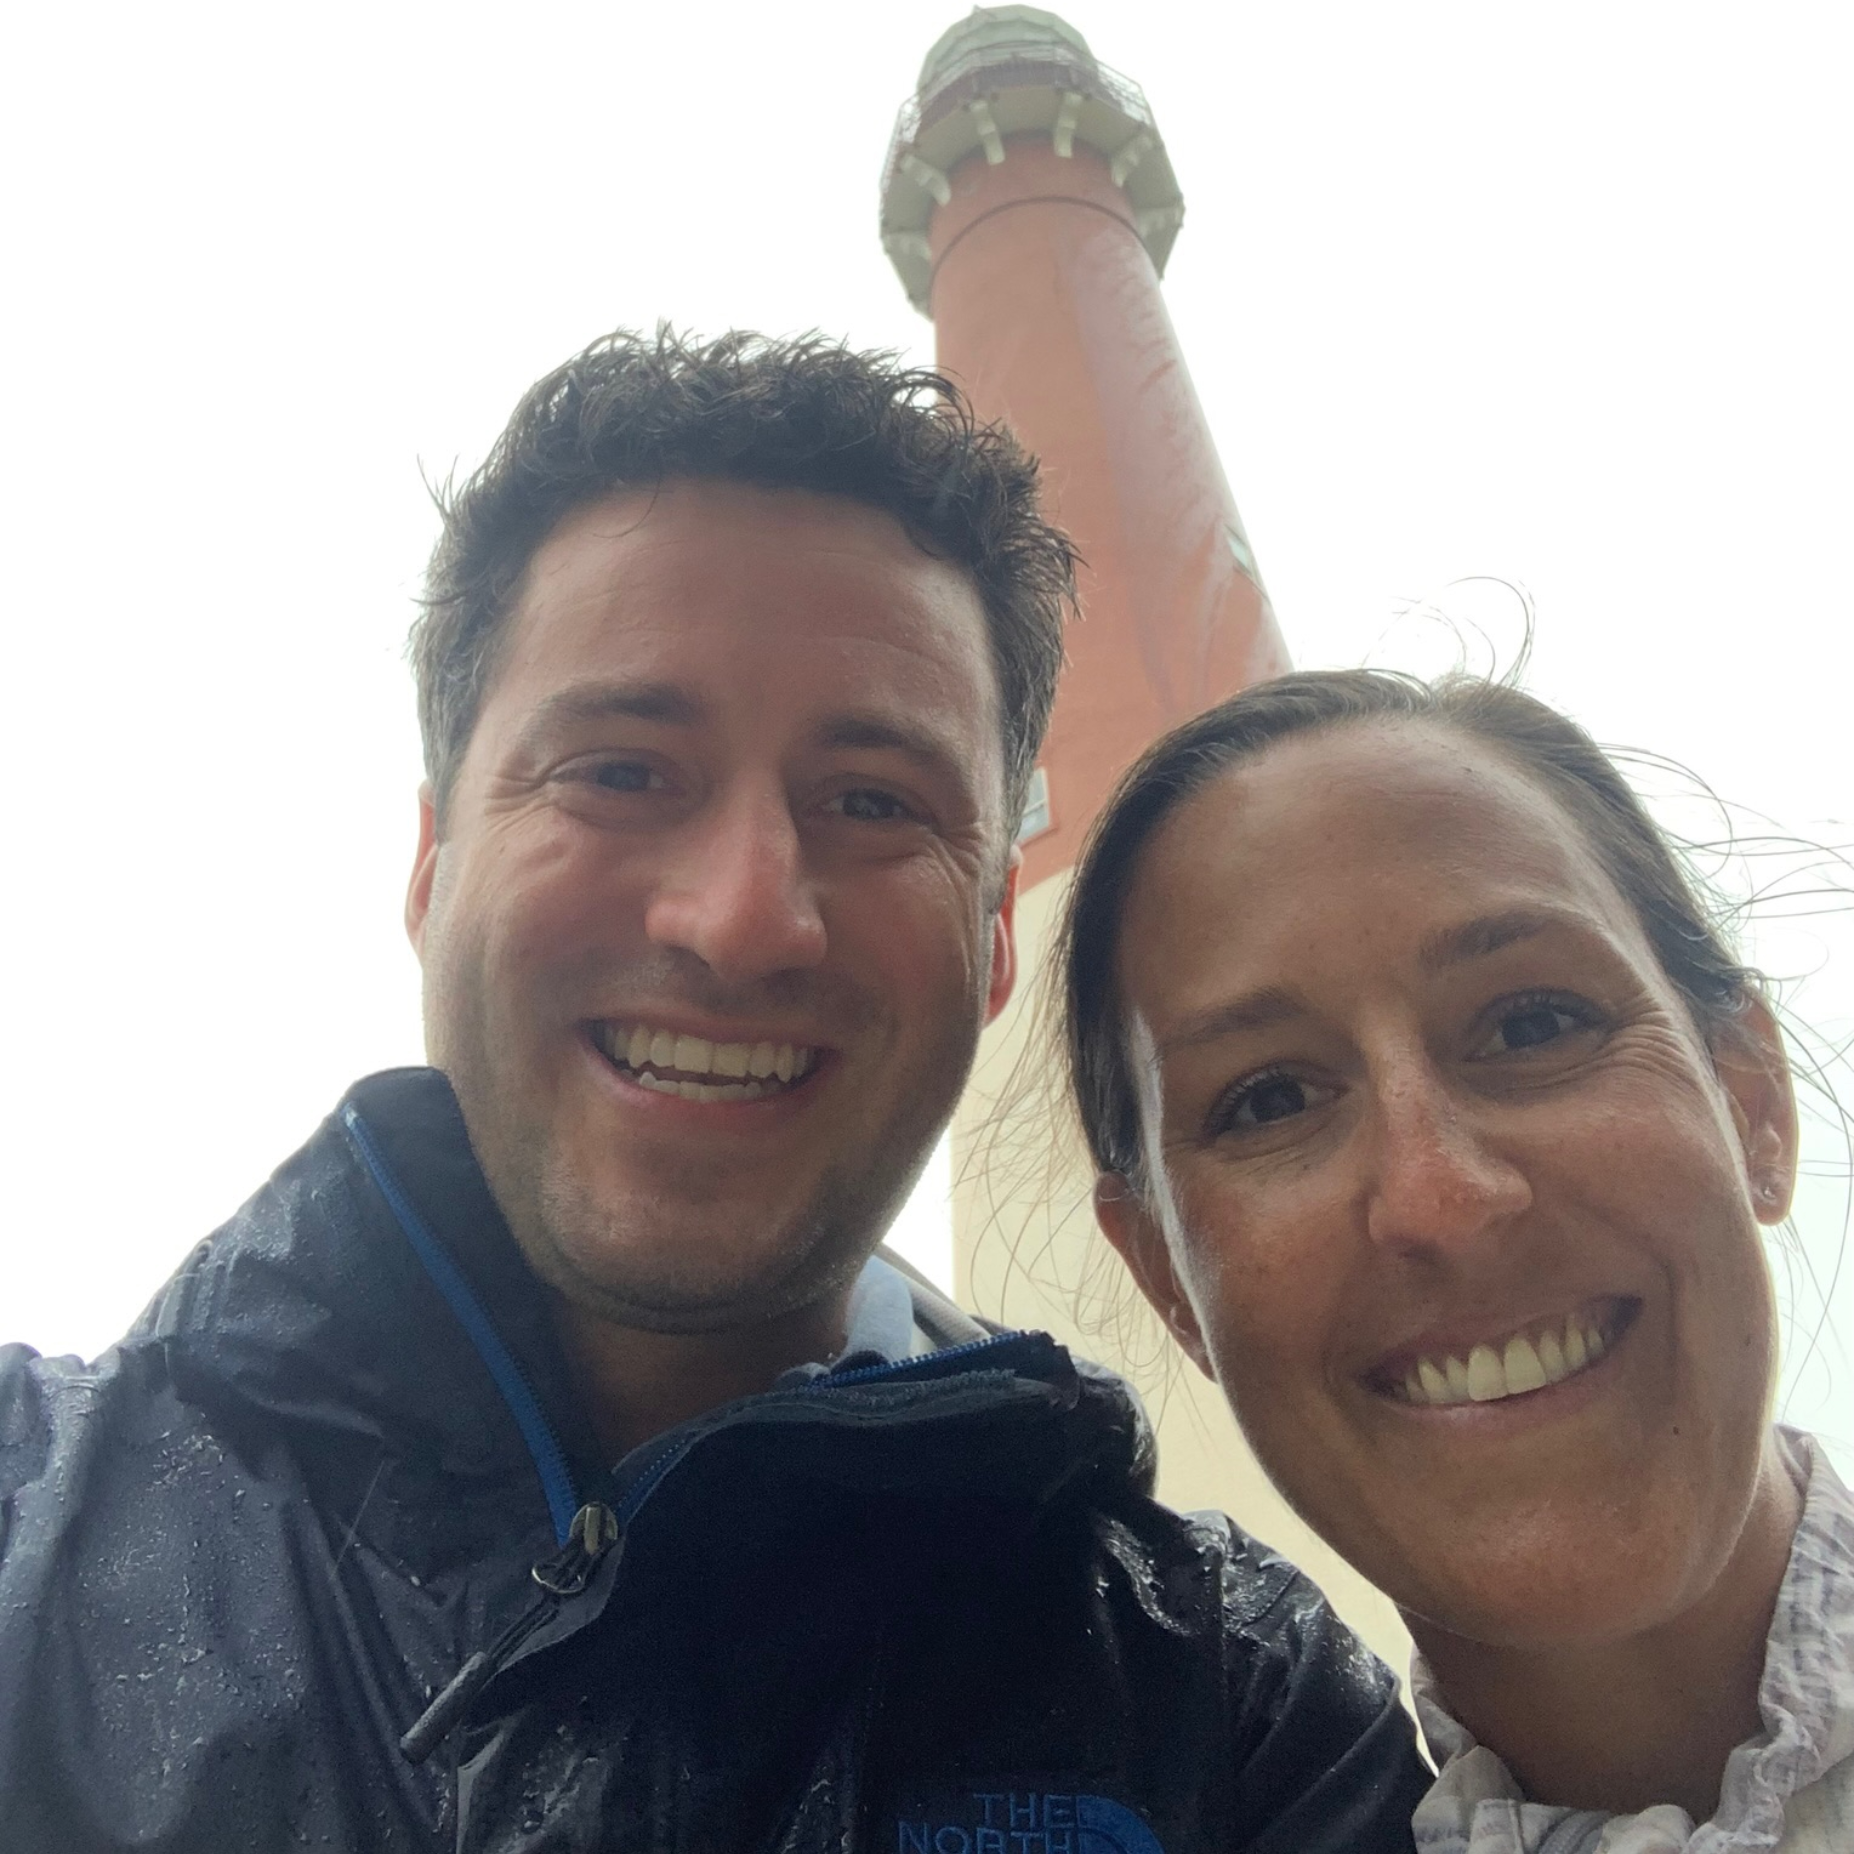 Visiting one of our favorite places, Long Beach Island, NJ! Despite the rain, we were just happy to be there.